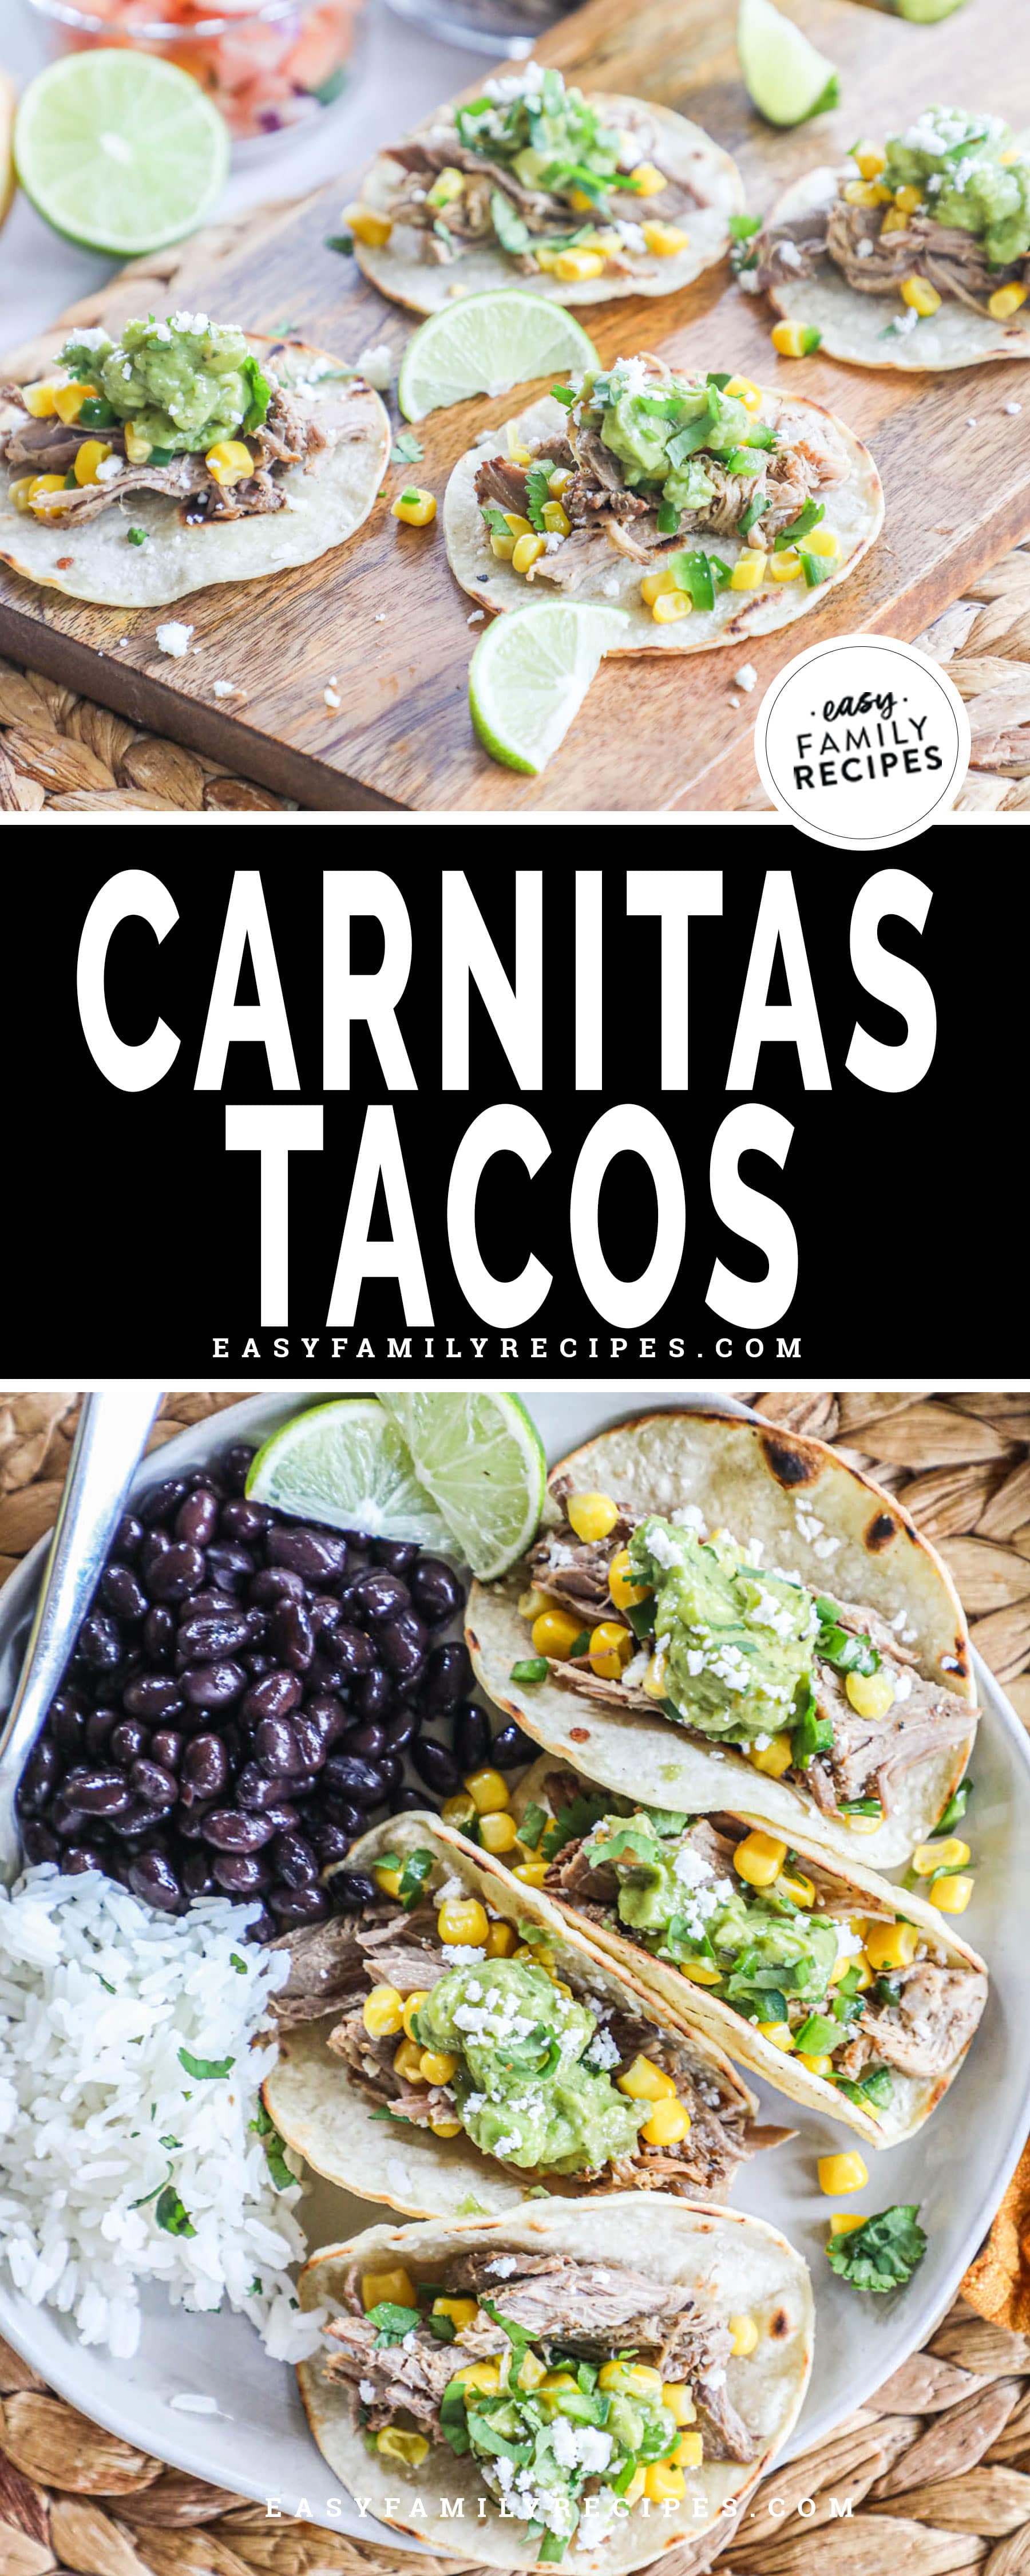 Carnitas tacos built on a corn tortilla shell with a side of black beans and rice.